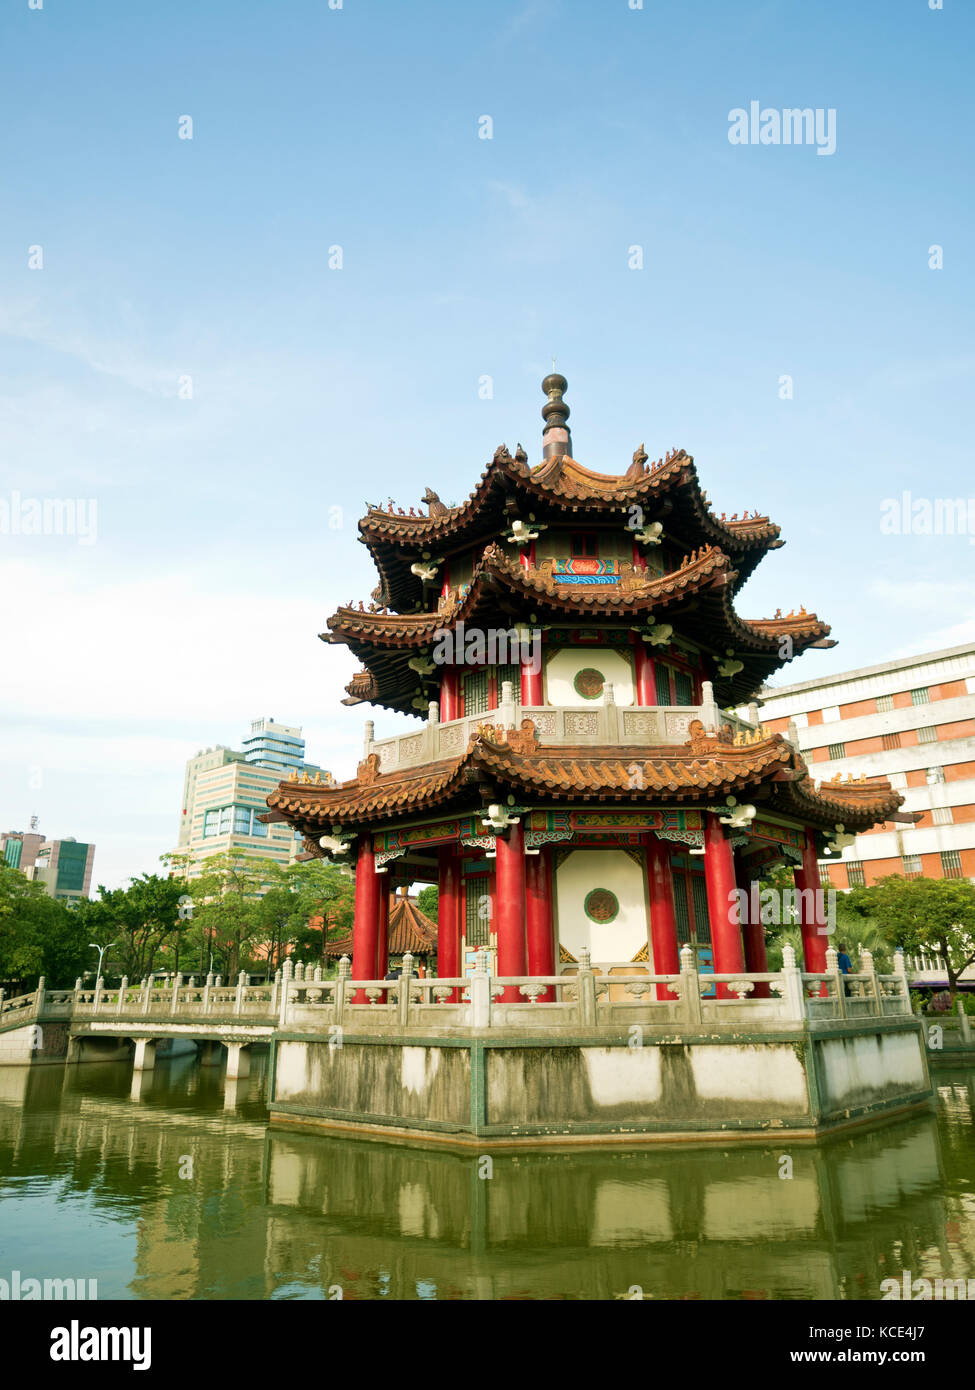 chinese style pavilion in lake Stock Photo